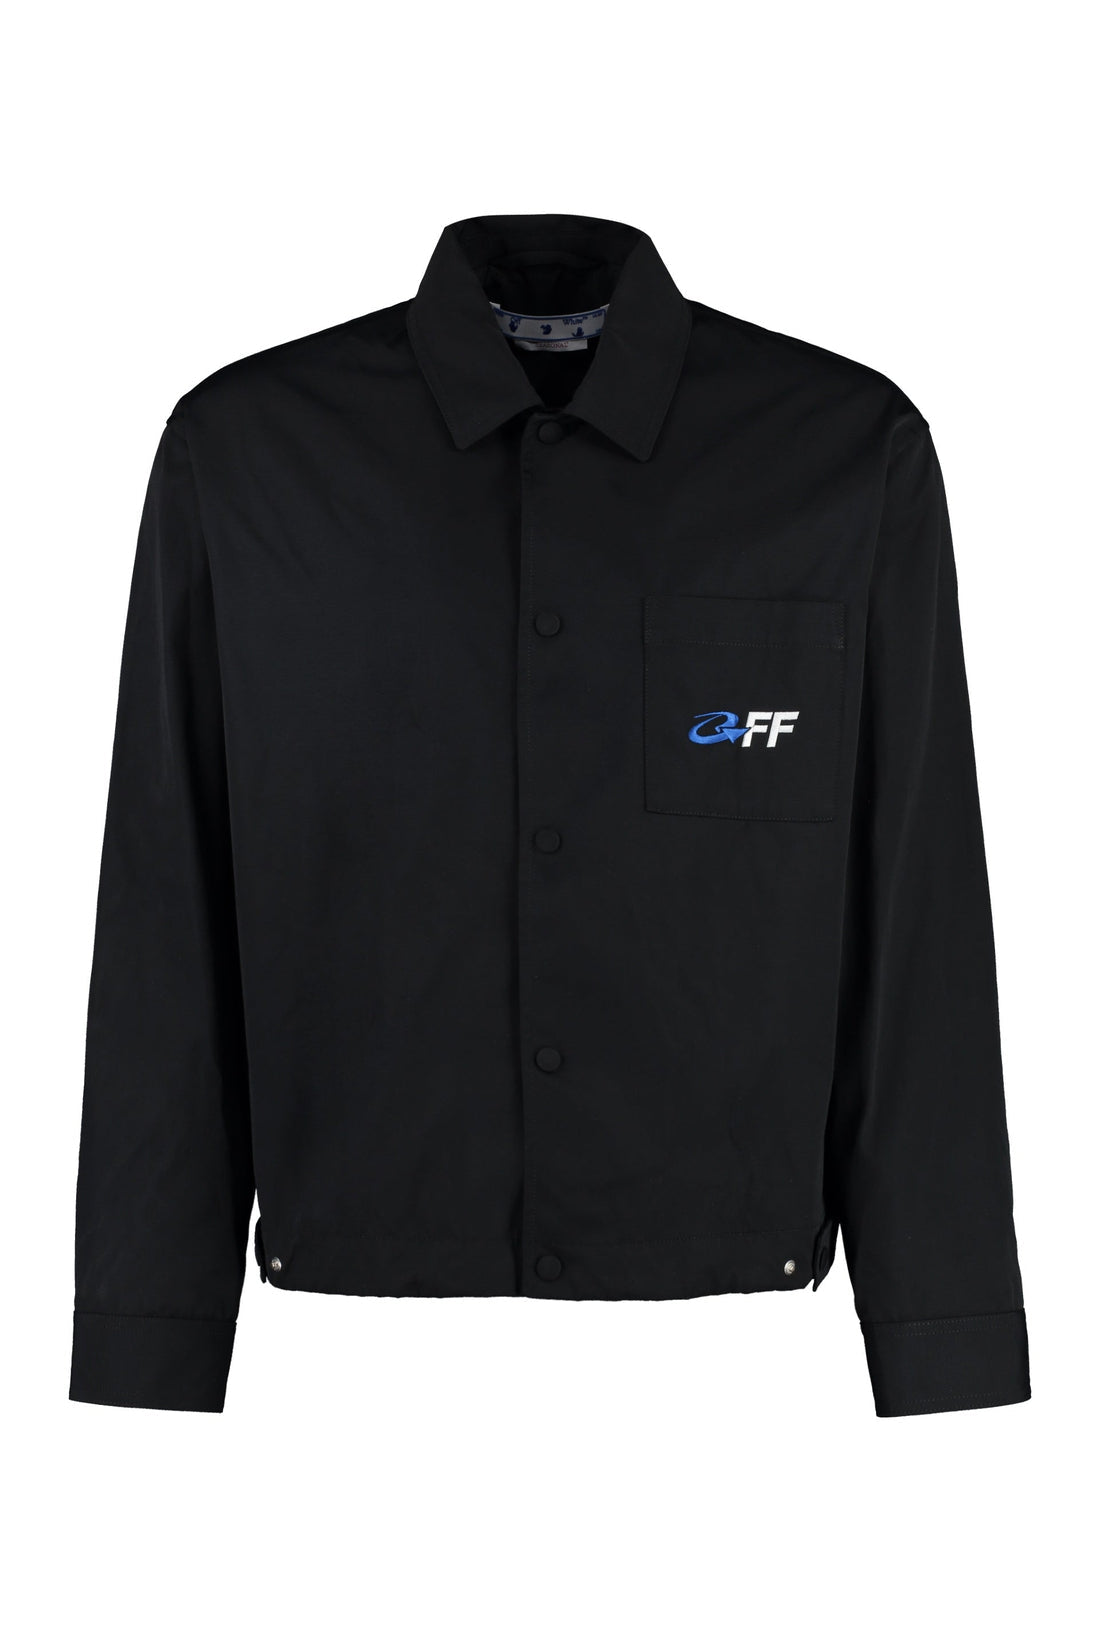 Off-White-OUTLET-SALE-Logo overshirt-ARCHIVIST